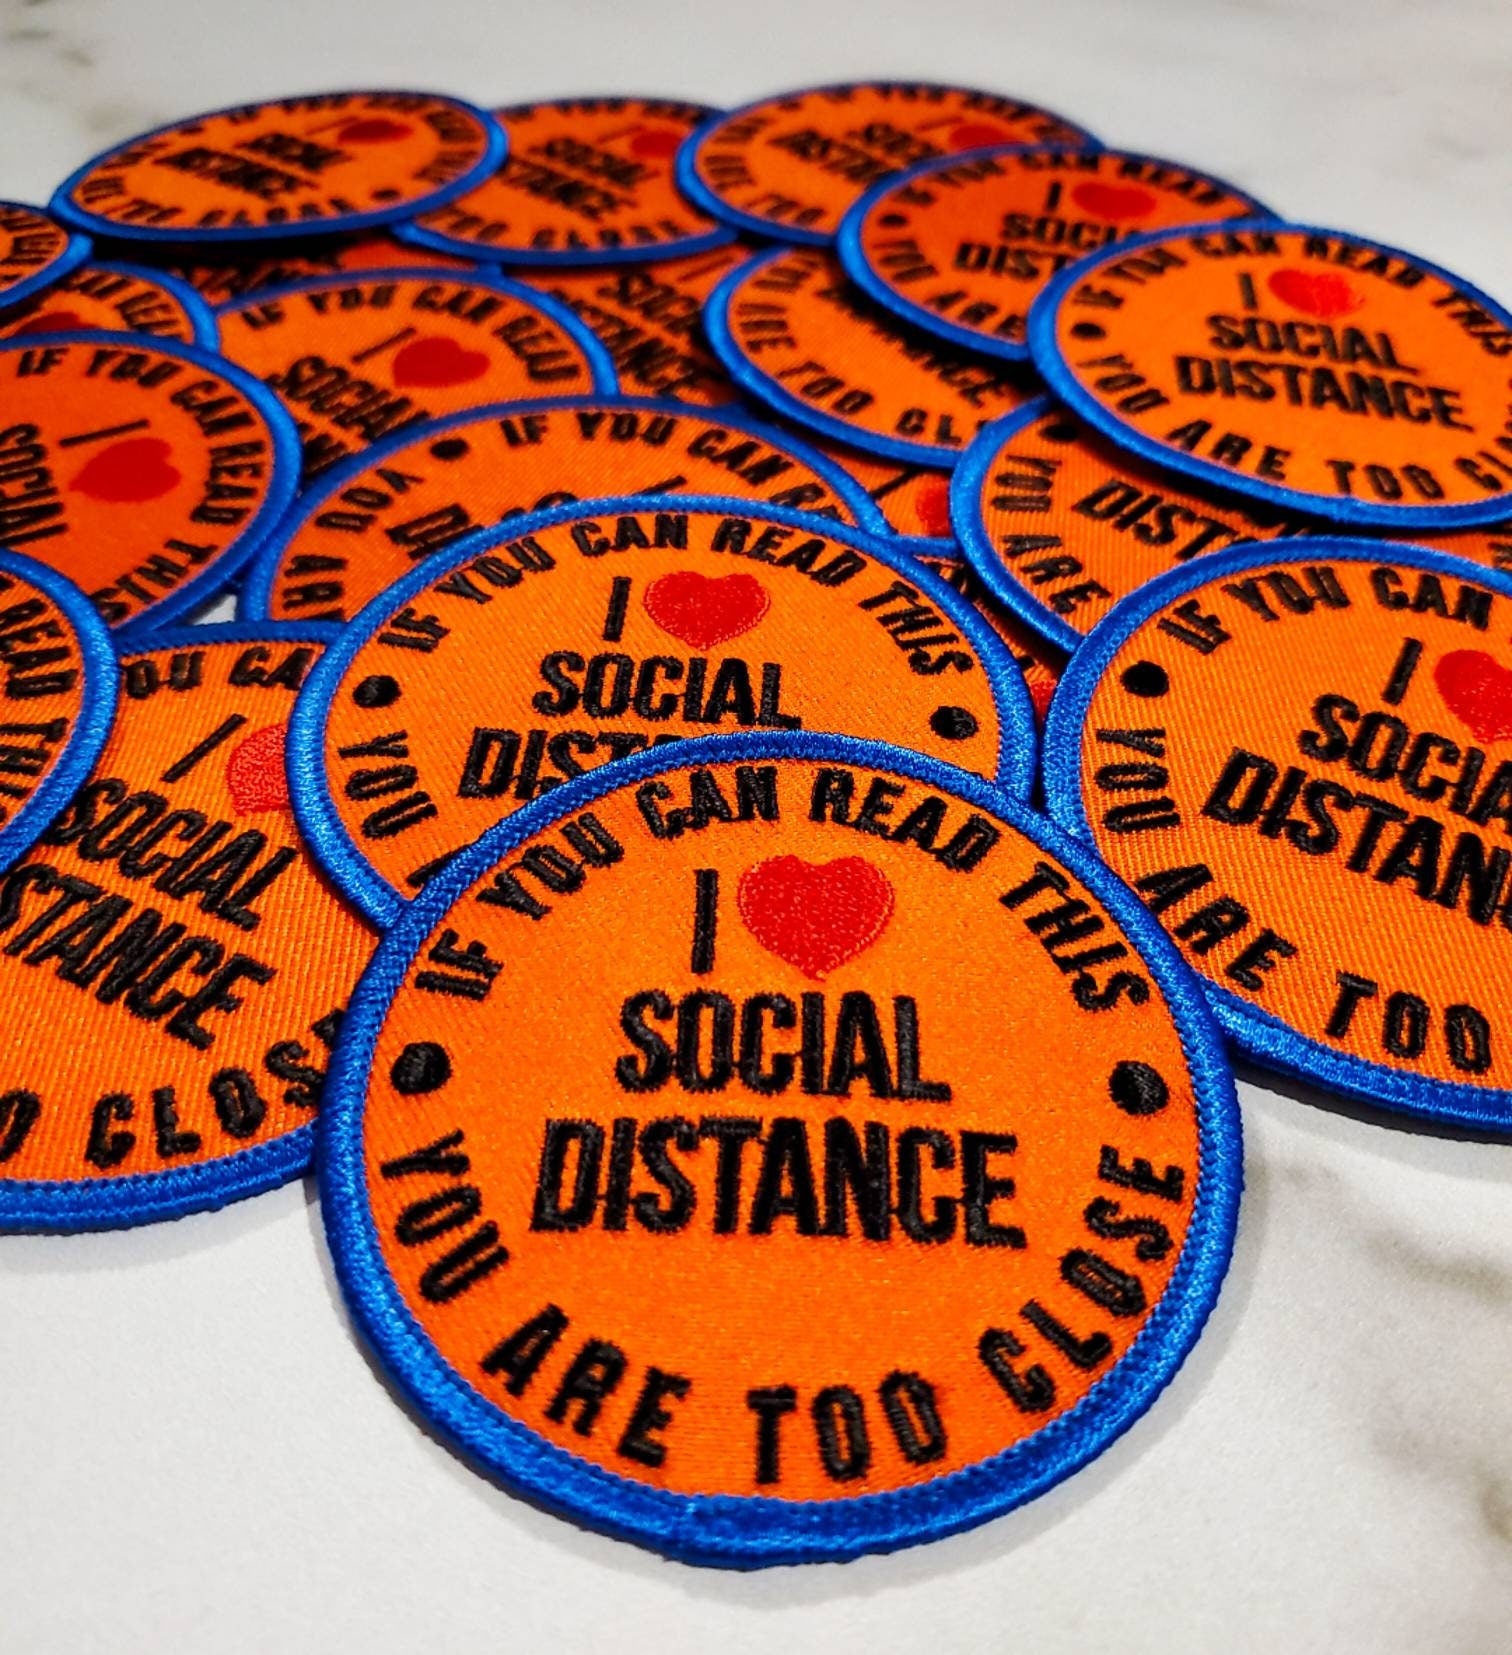 NEW Arrival, "I Love Social Distance" Patches for Masks, Colorful Iron-on Embroidered Applique, Size 2.85", Social Distancing, DIY Crafts